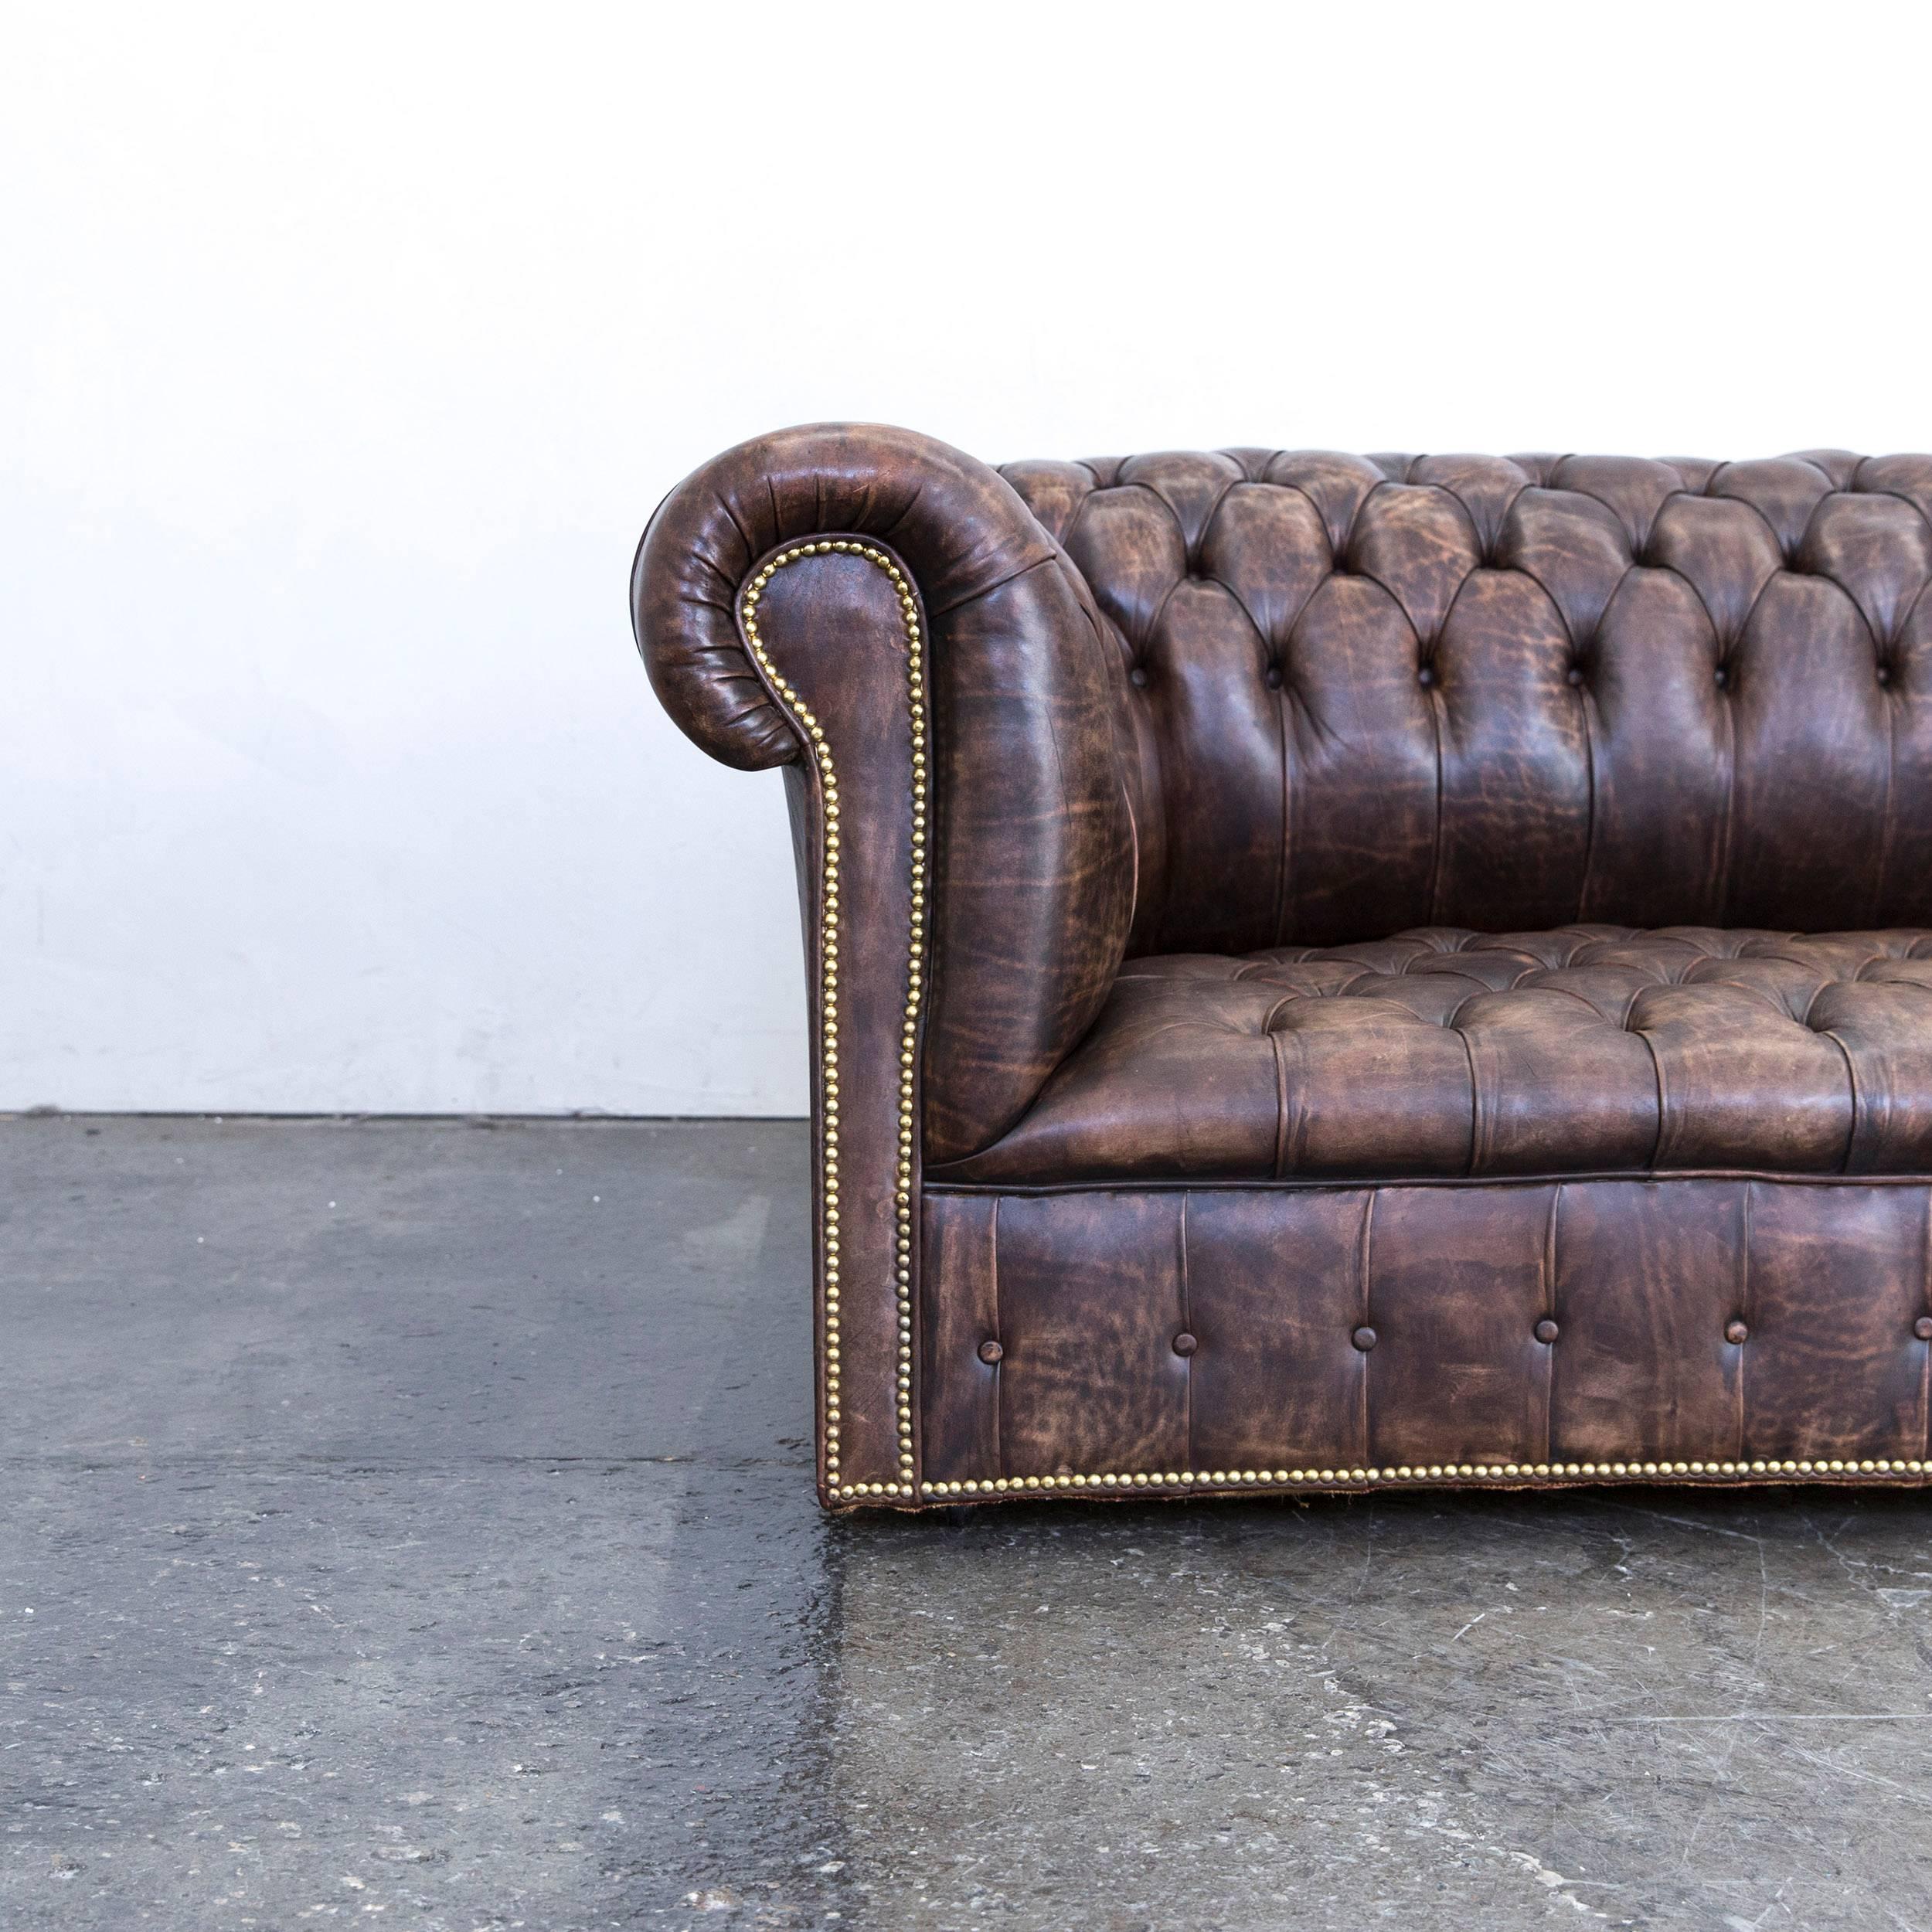 Brown colored Chesterfield leather sofa in a vintage design, made for pure comfort and elegance.